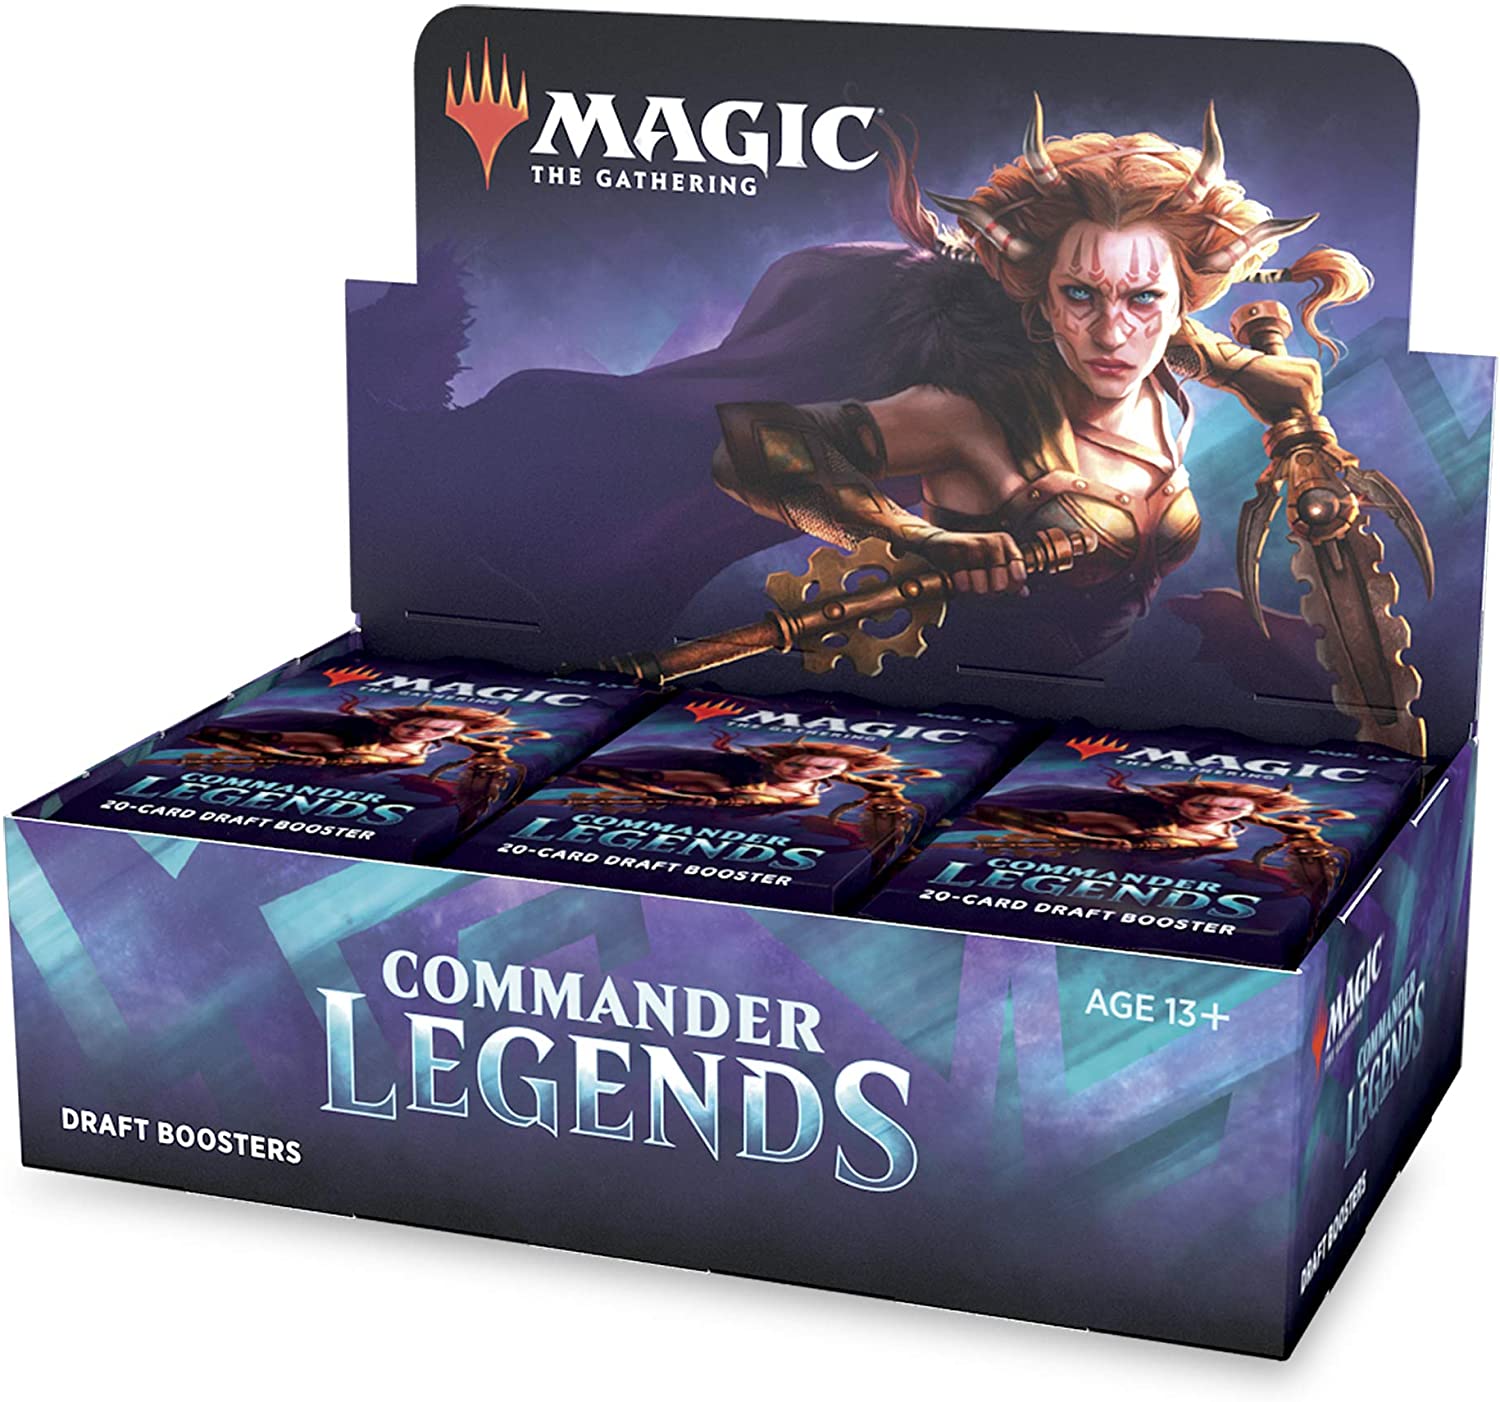 Magic the Gathering: Commander Legends Draft Booster Box | D20 Games